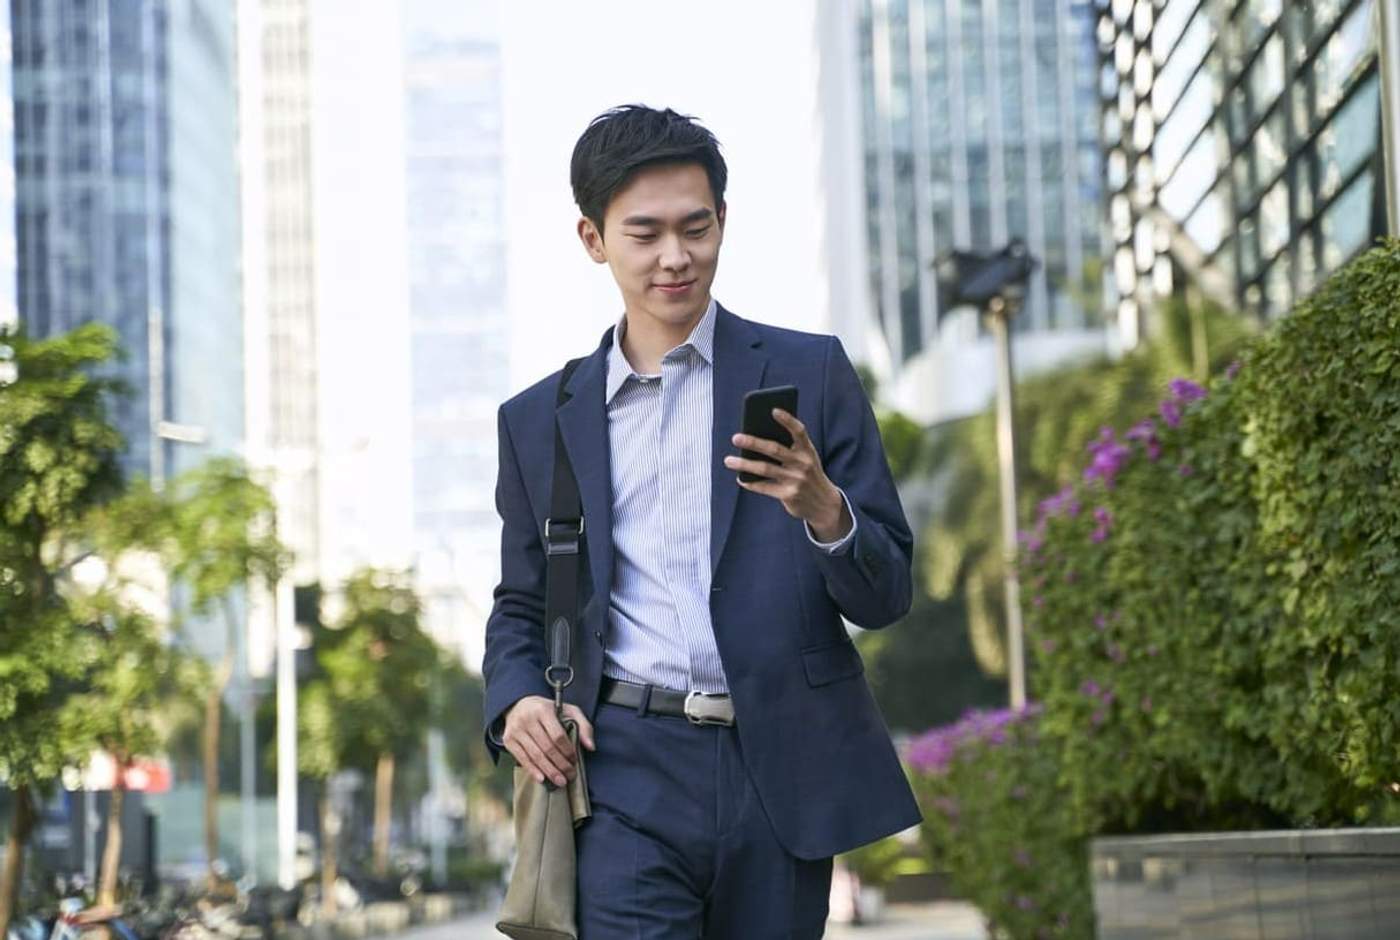 Man walking past modern buildings equipped with smart building automation systems